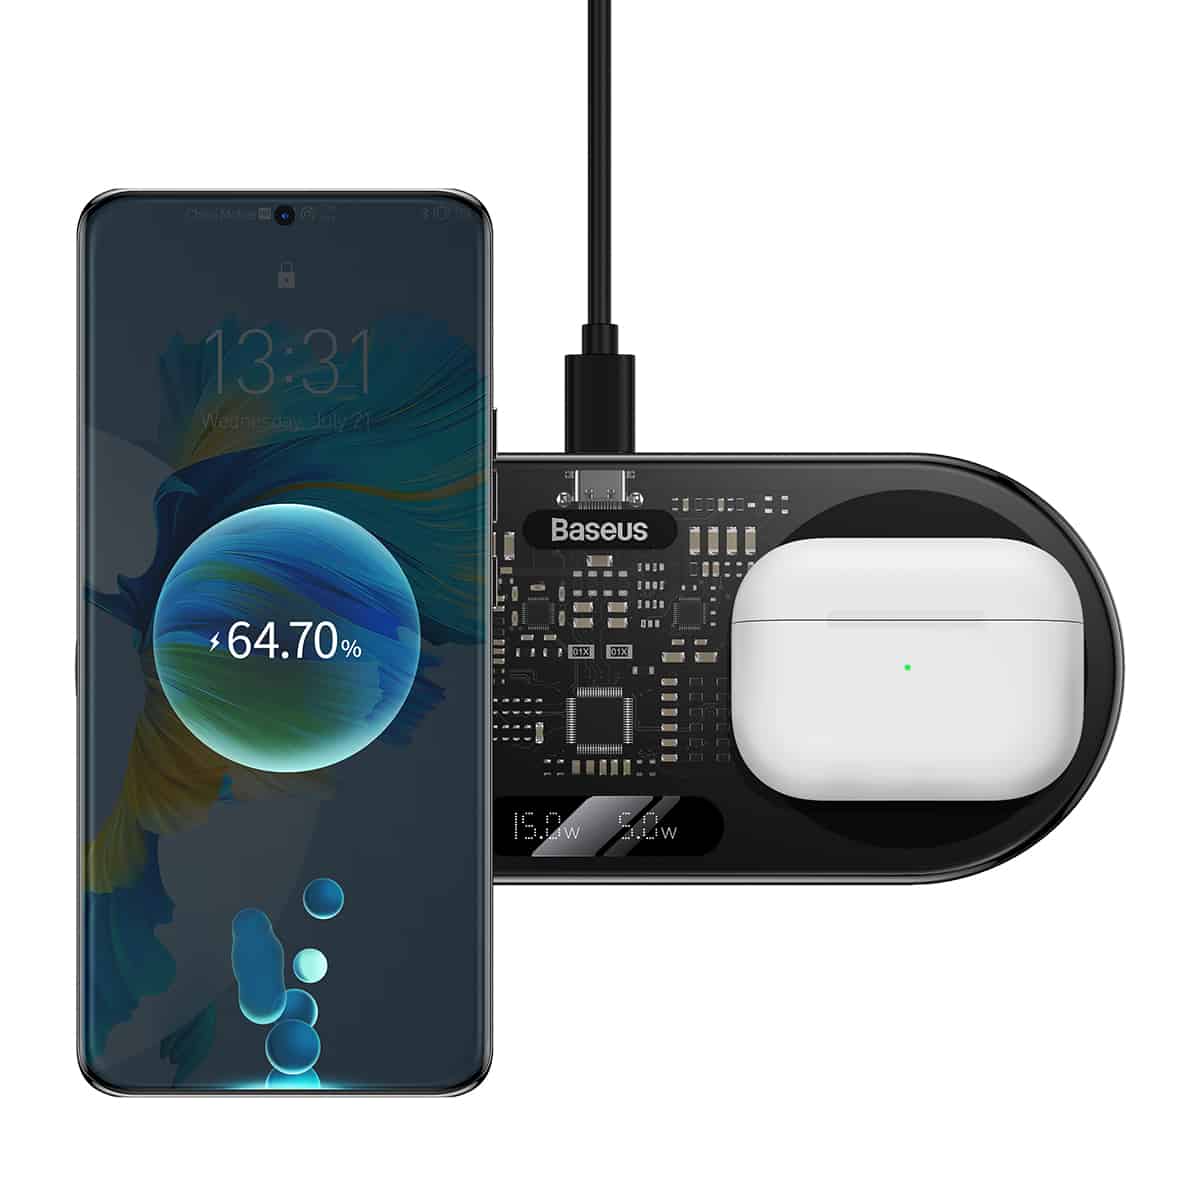 Baseus Digital LED Display 2in1 Wireless Charger 20W Black Universal version